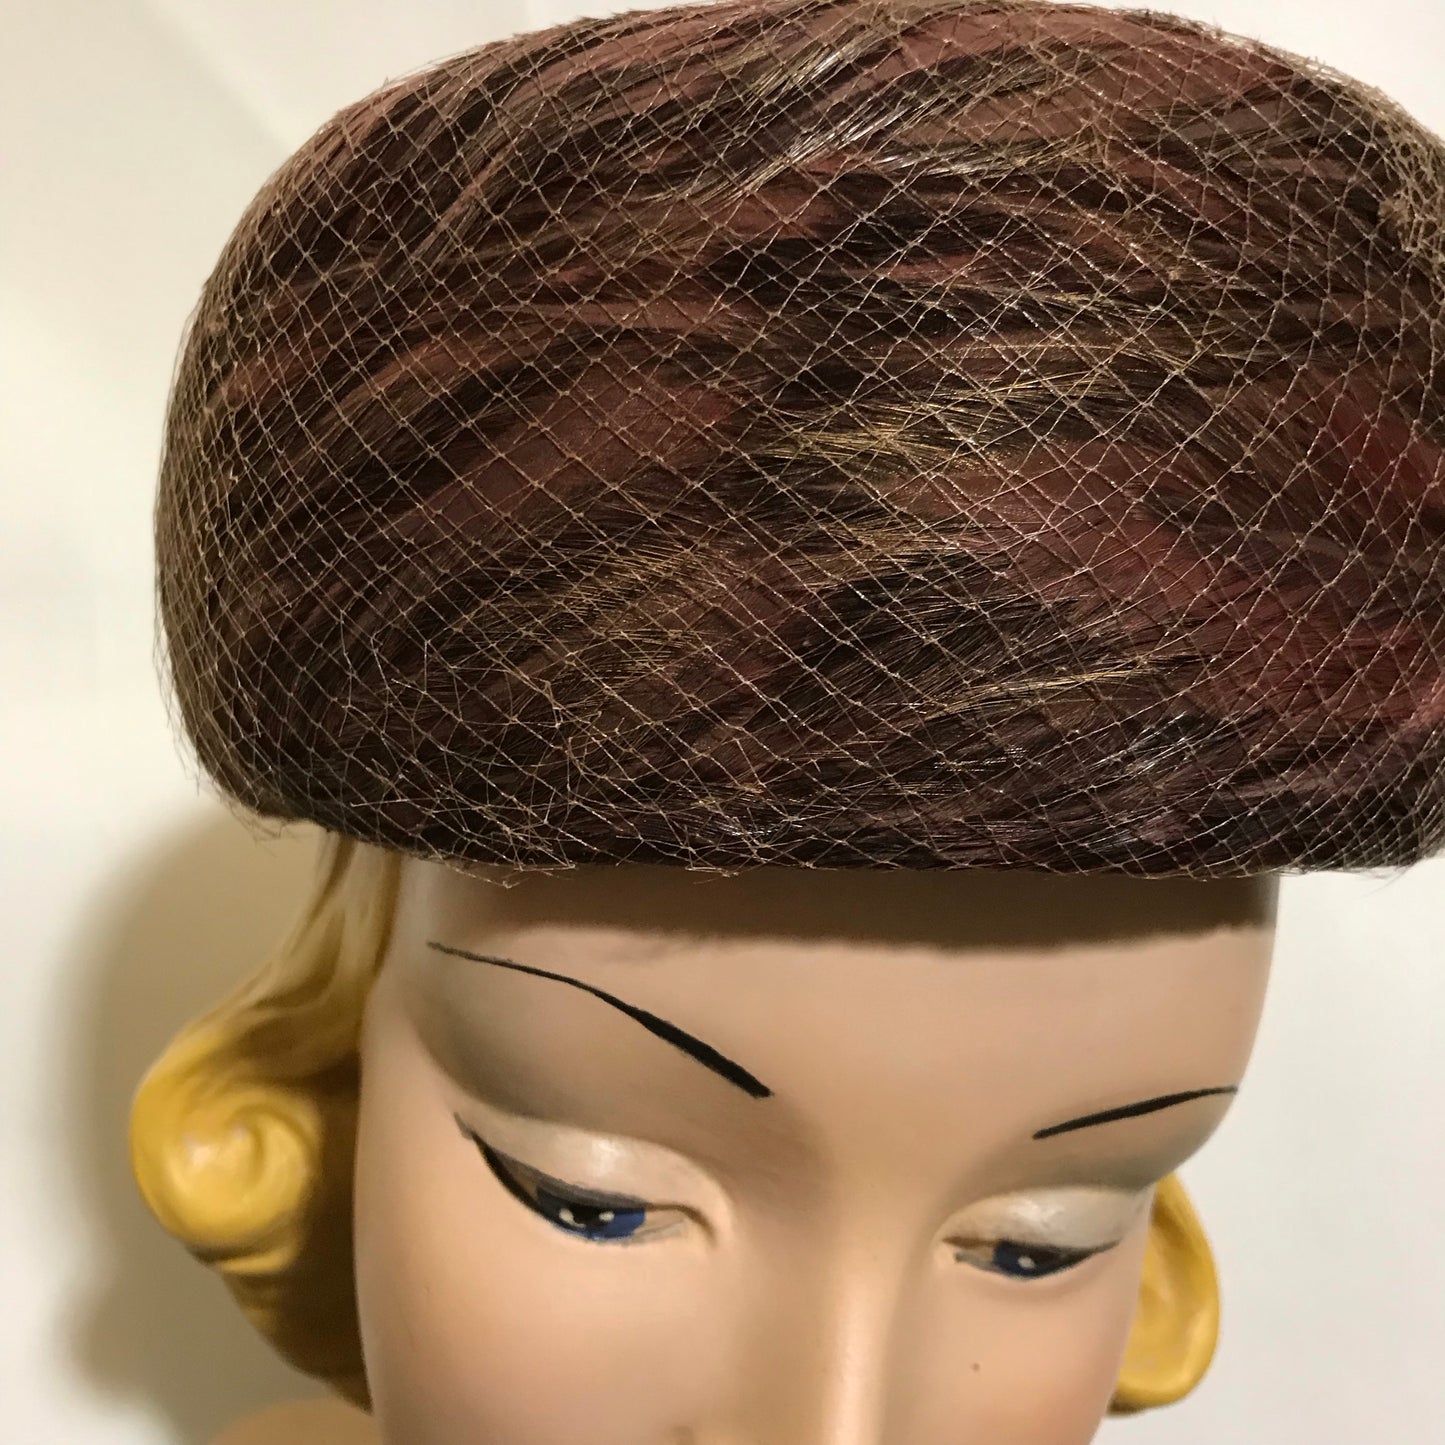 Bronze and Cocoa Swirled Feather Rounded Pill Box Hat circa 1960s